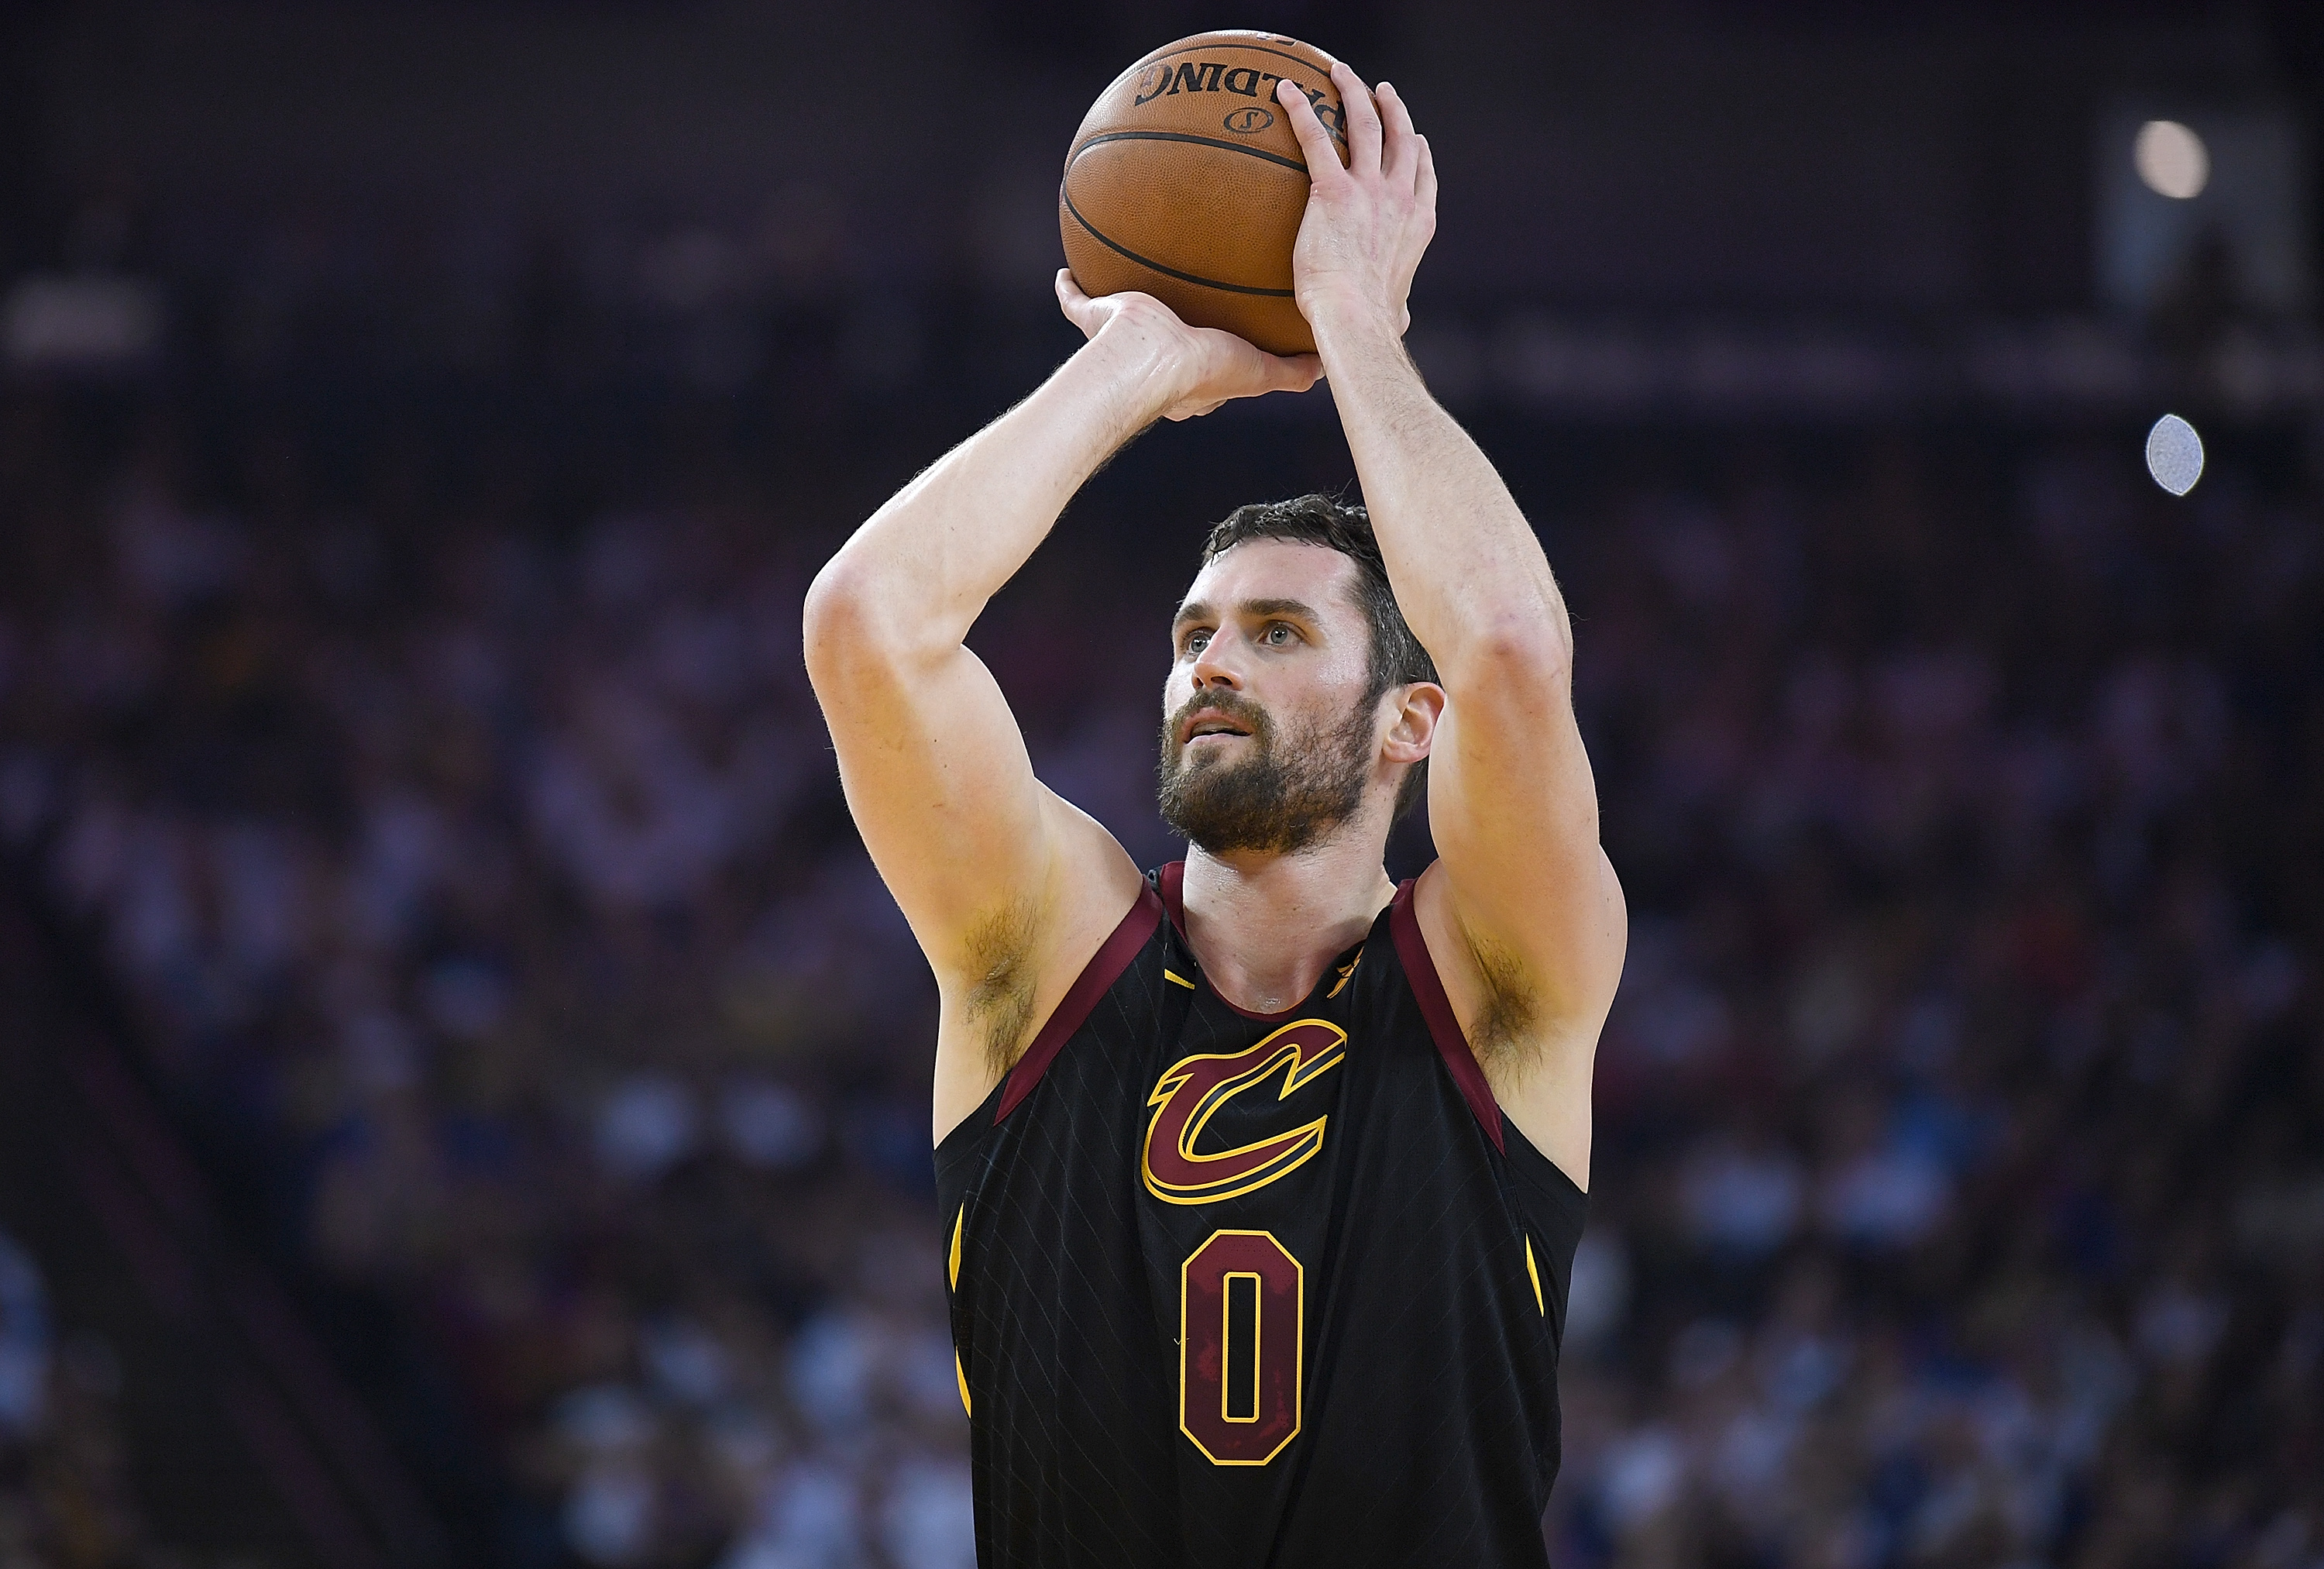 UCLA Basketball legend Kevin Love opens up about mental health